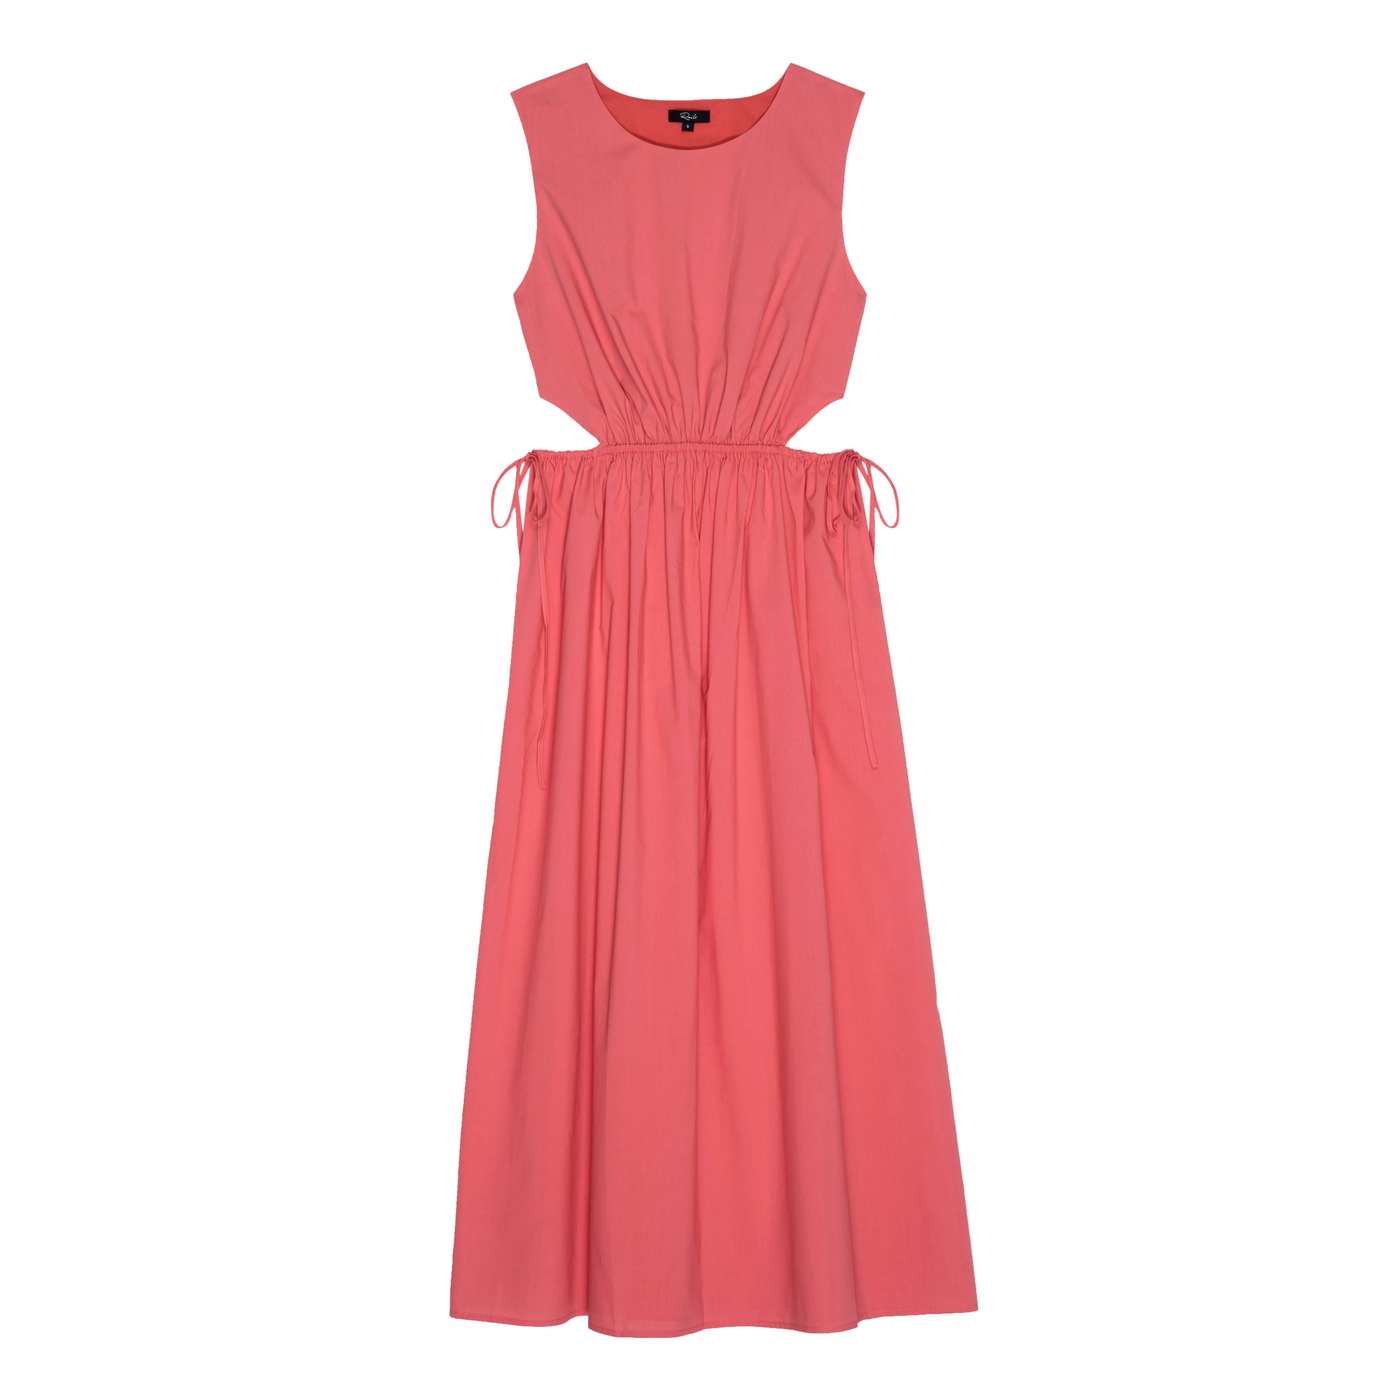 Gotstyle Fashion - Rails Dresses Side Cut Outs Midi Pullover Dress with Ties - Coral